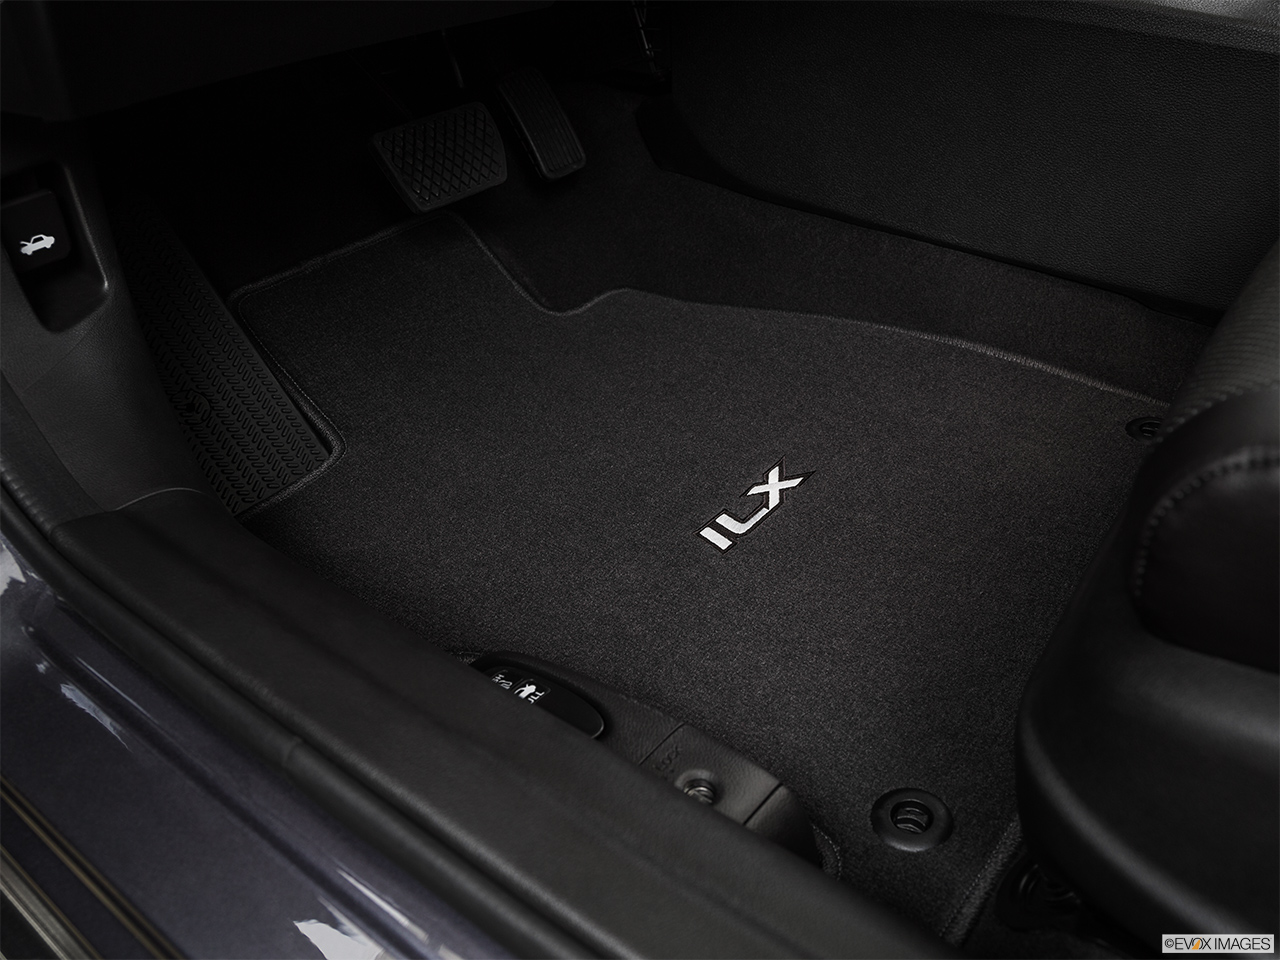 2015 Acura ILX 5-Speed Automatic Driver's floor mat and pedals. Mid-seat level from outside looking in. 